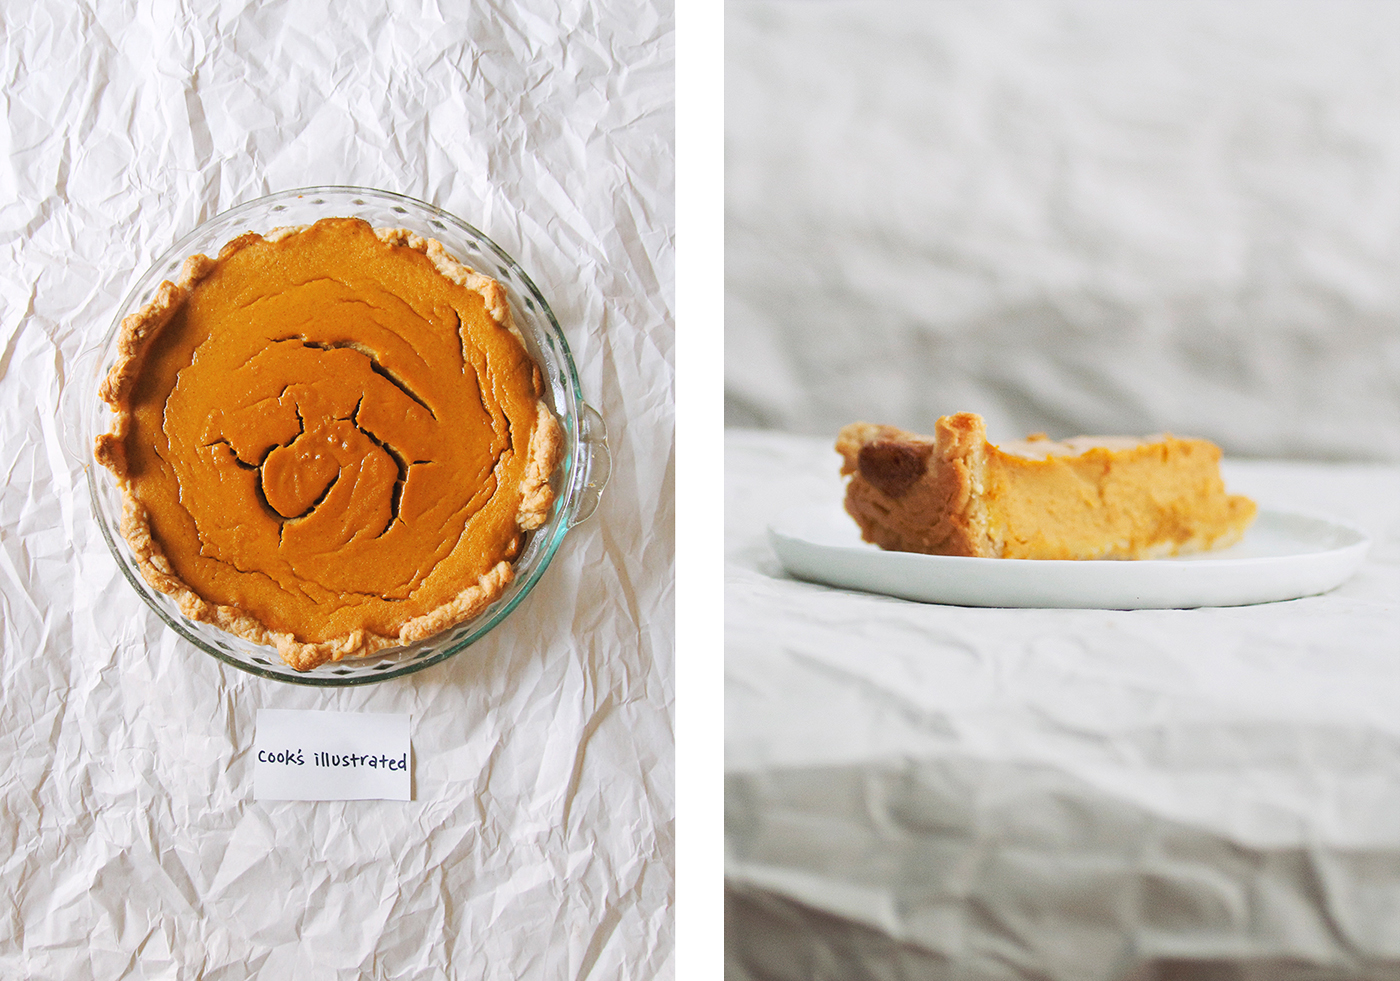 From left to right: Overhead view and sideview of Cook's Illustrated pumpkin pie recipe